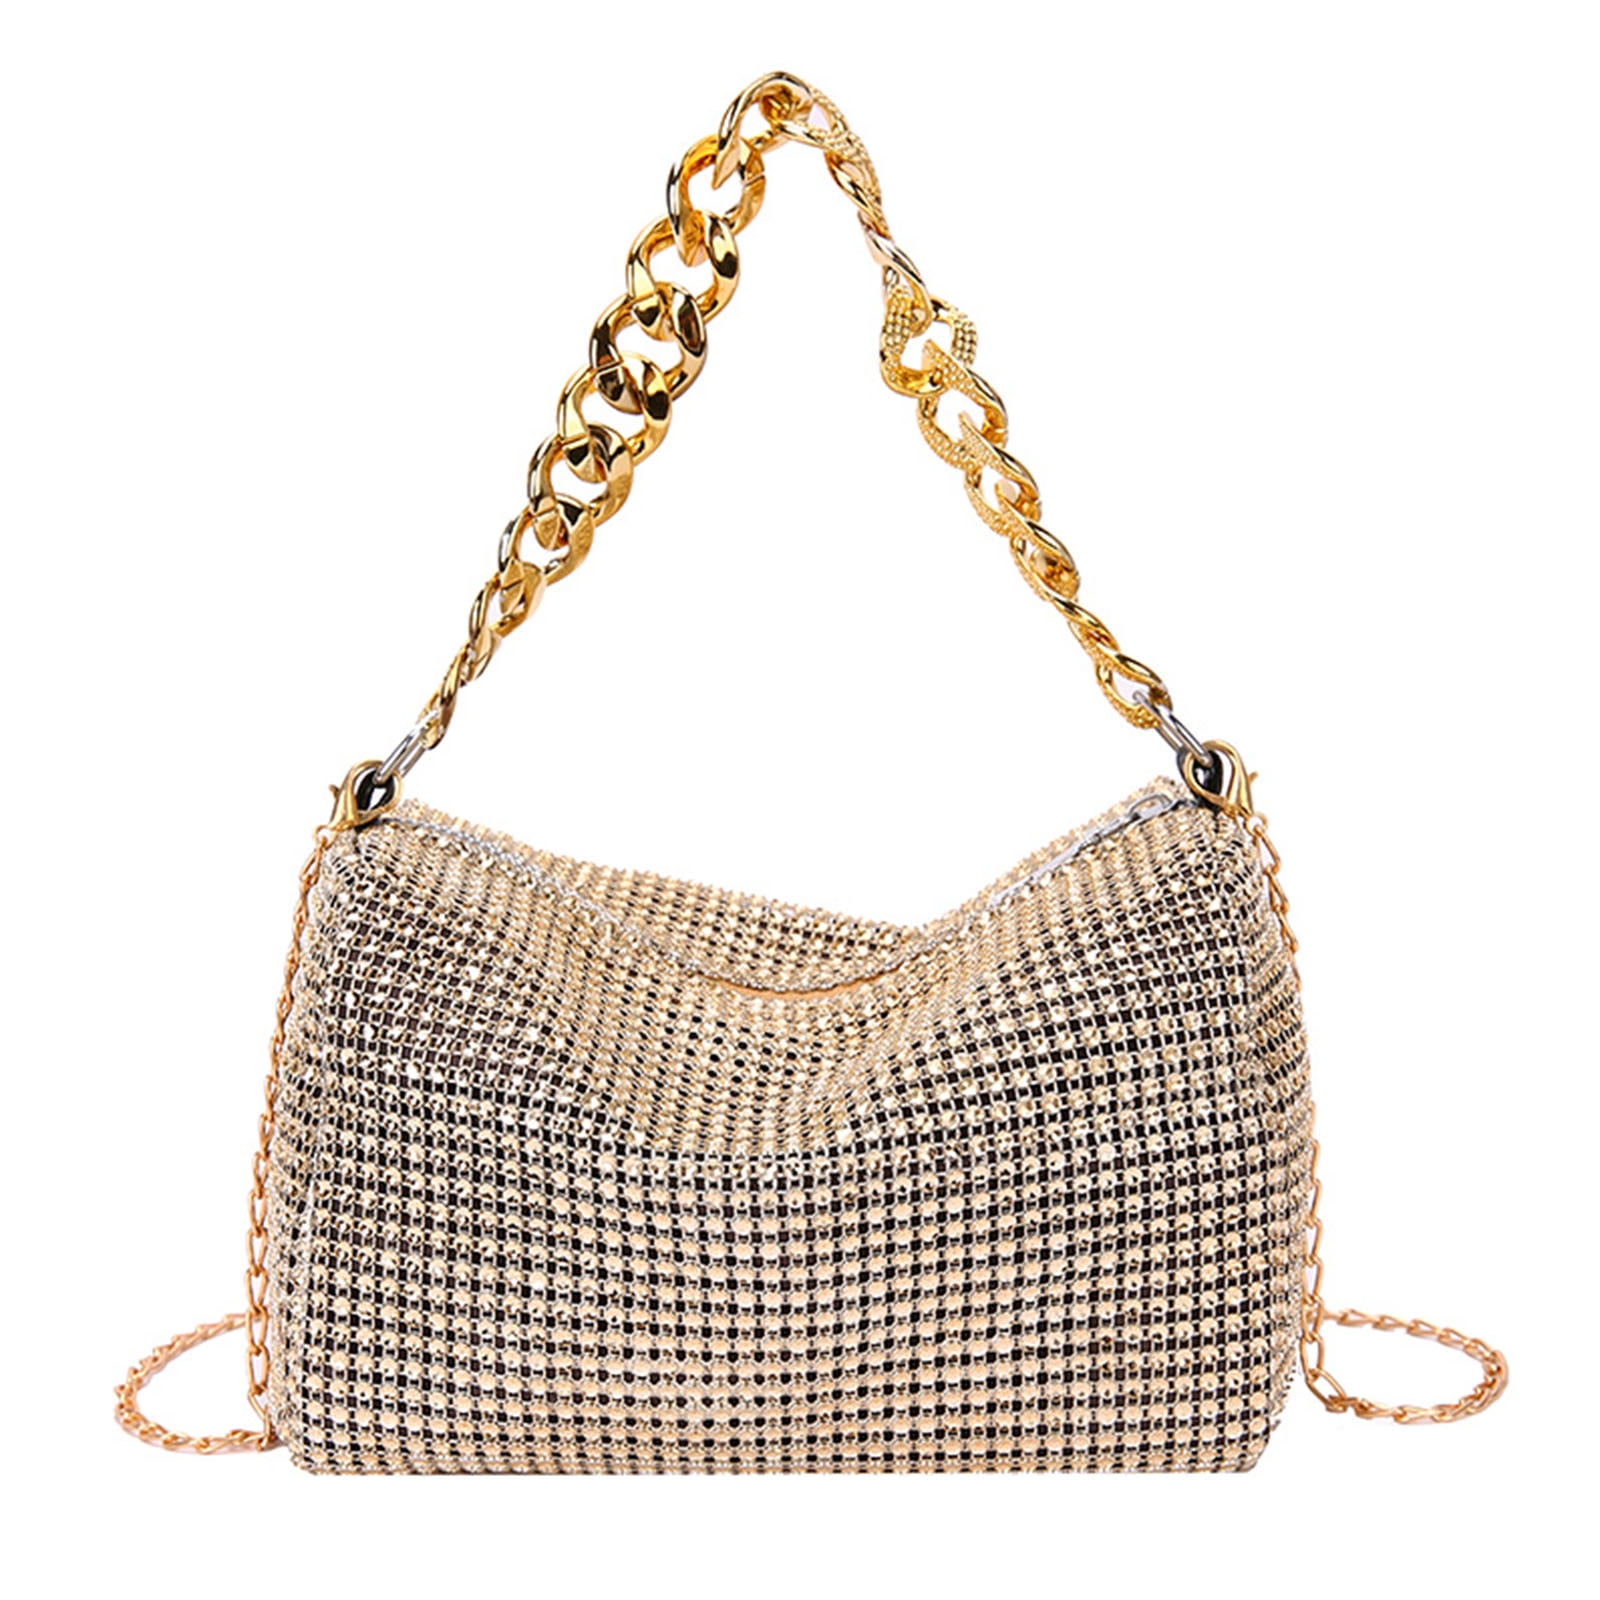 Casual Women Party Clutch Purse White Pearl Evening Bag, $39.98